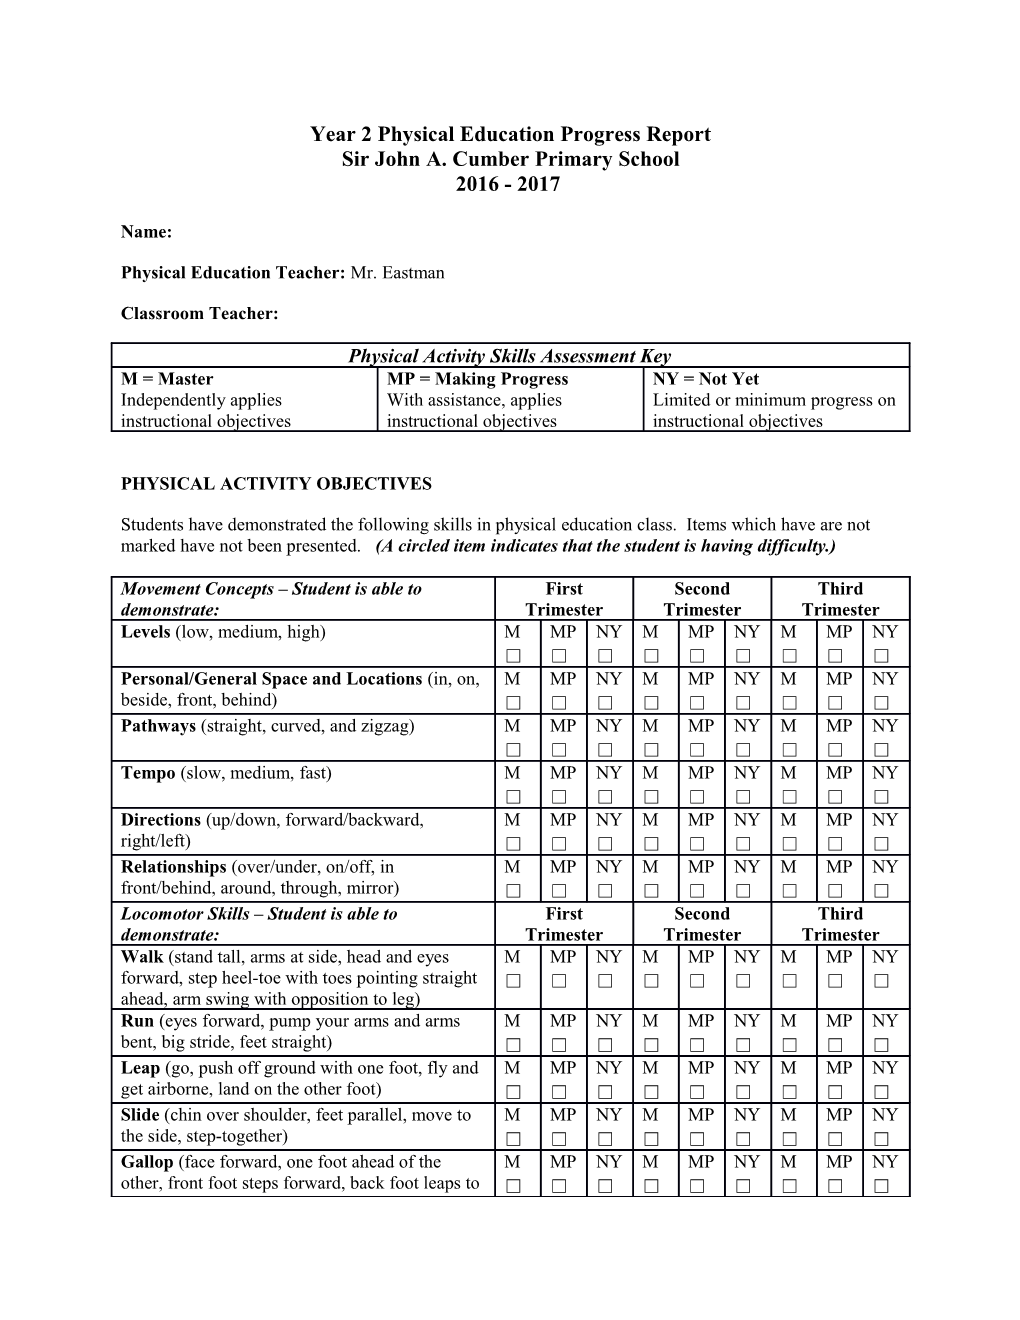 Year 2 Physical Education Progress Report